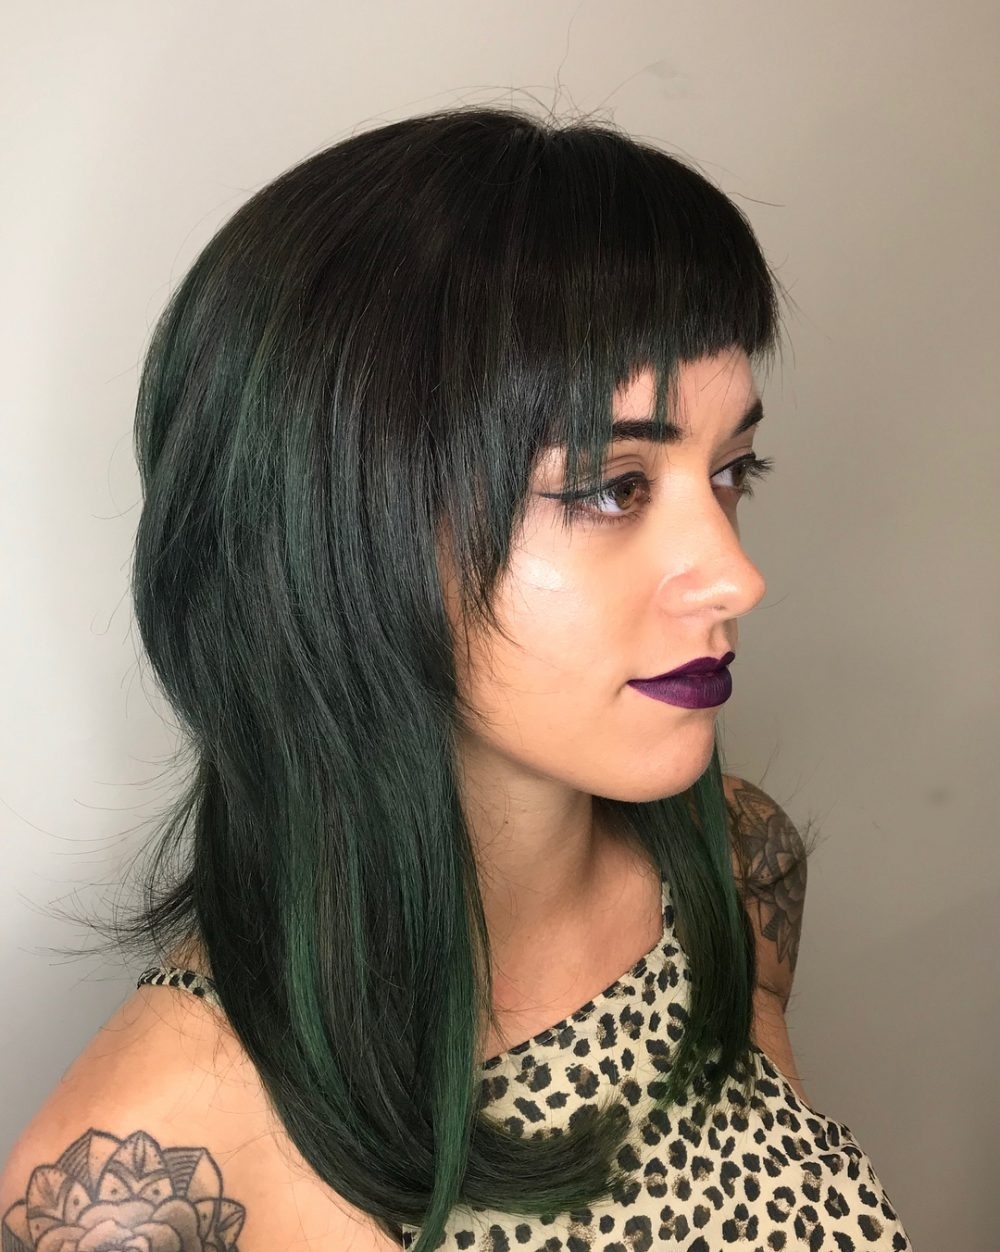 47 Very Edgy Hairstyles You'll See In 2019 with regard to Mid Length Edgy Hair